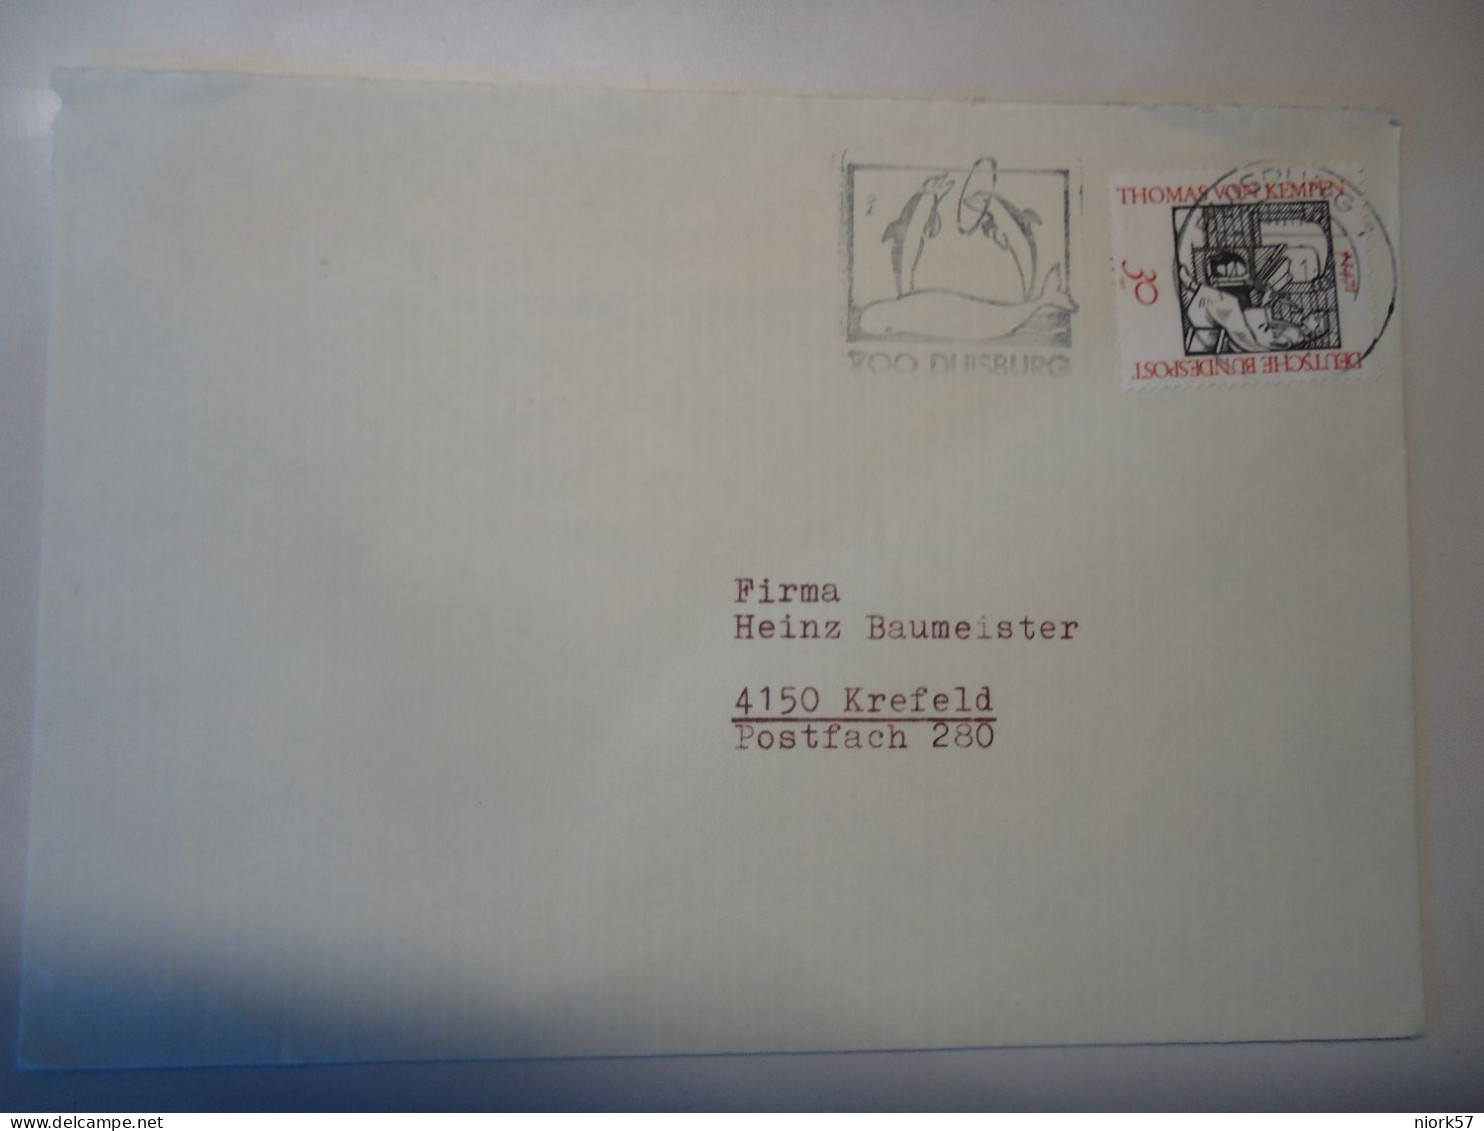 GERMANY   COVER  1971 POSTMARK DOLPHINS - Dauphins